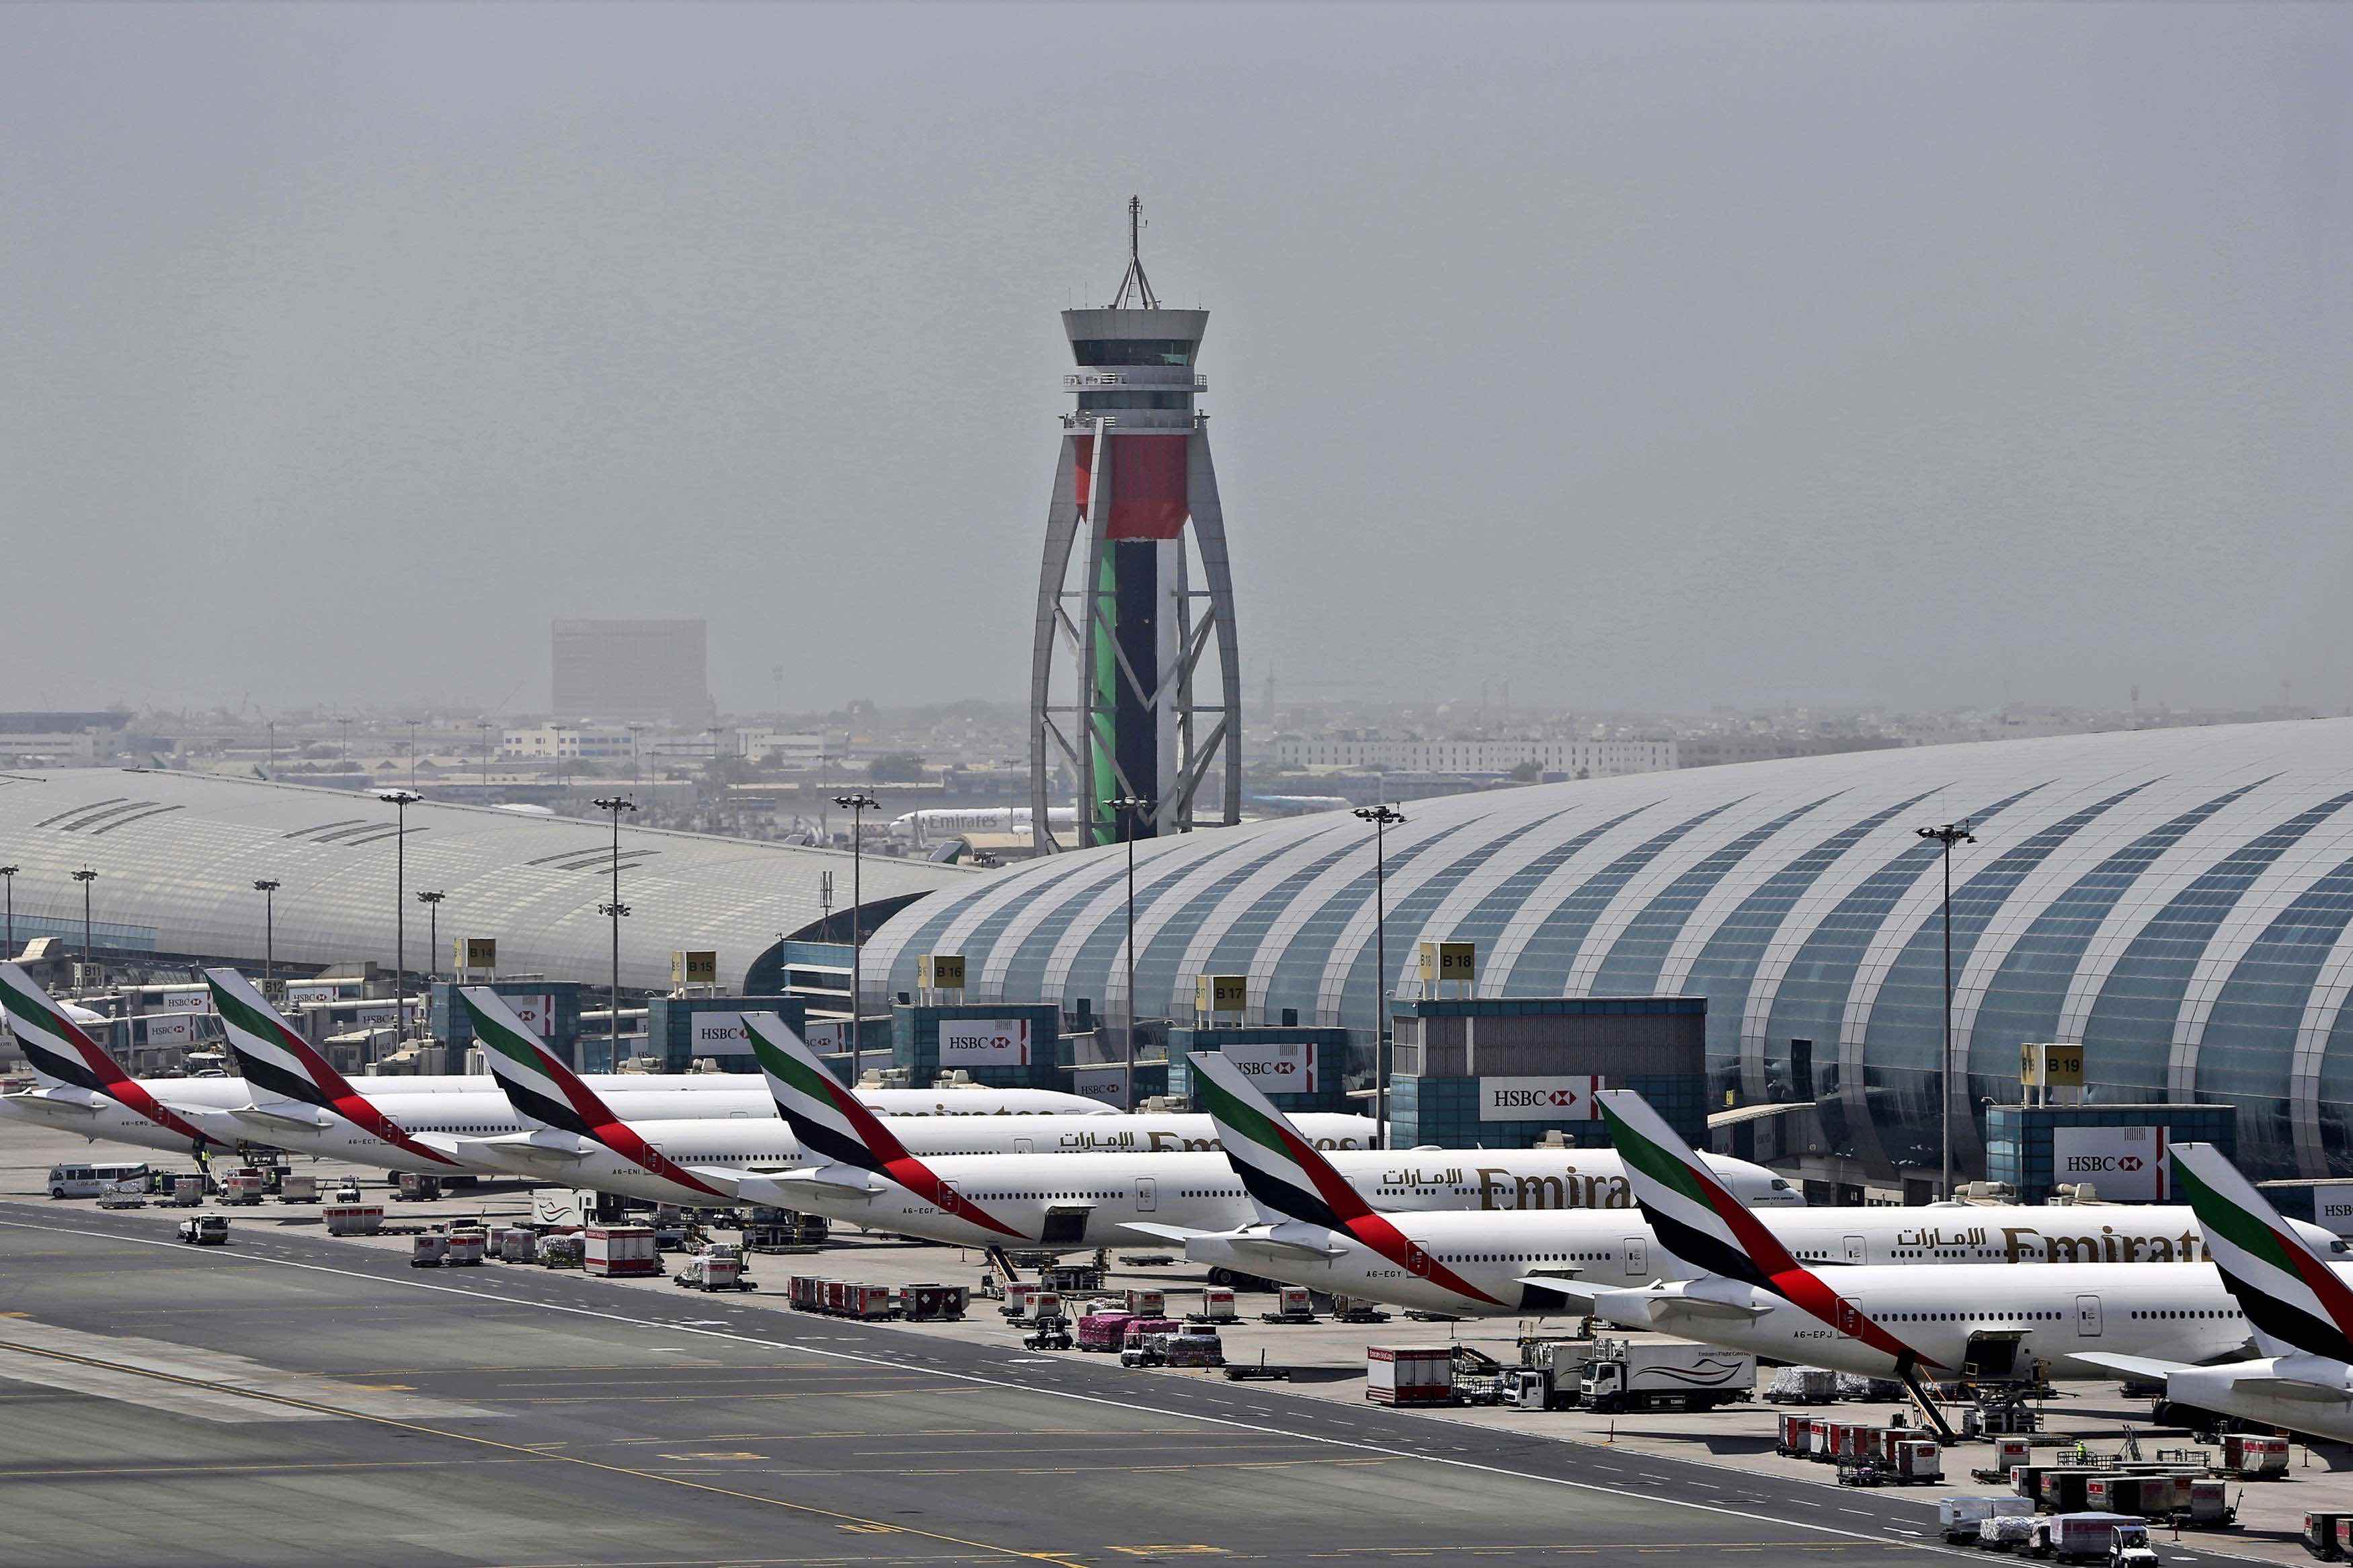 The airport retained its position as the top global airport serving international passengers